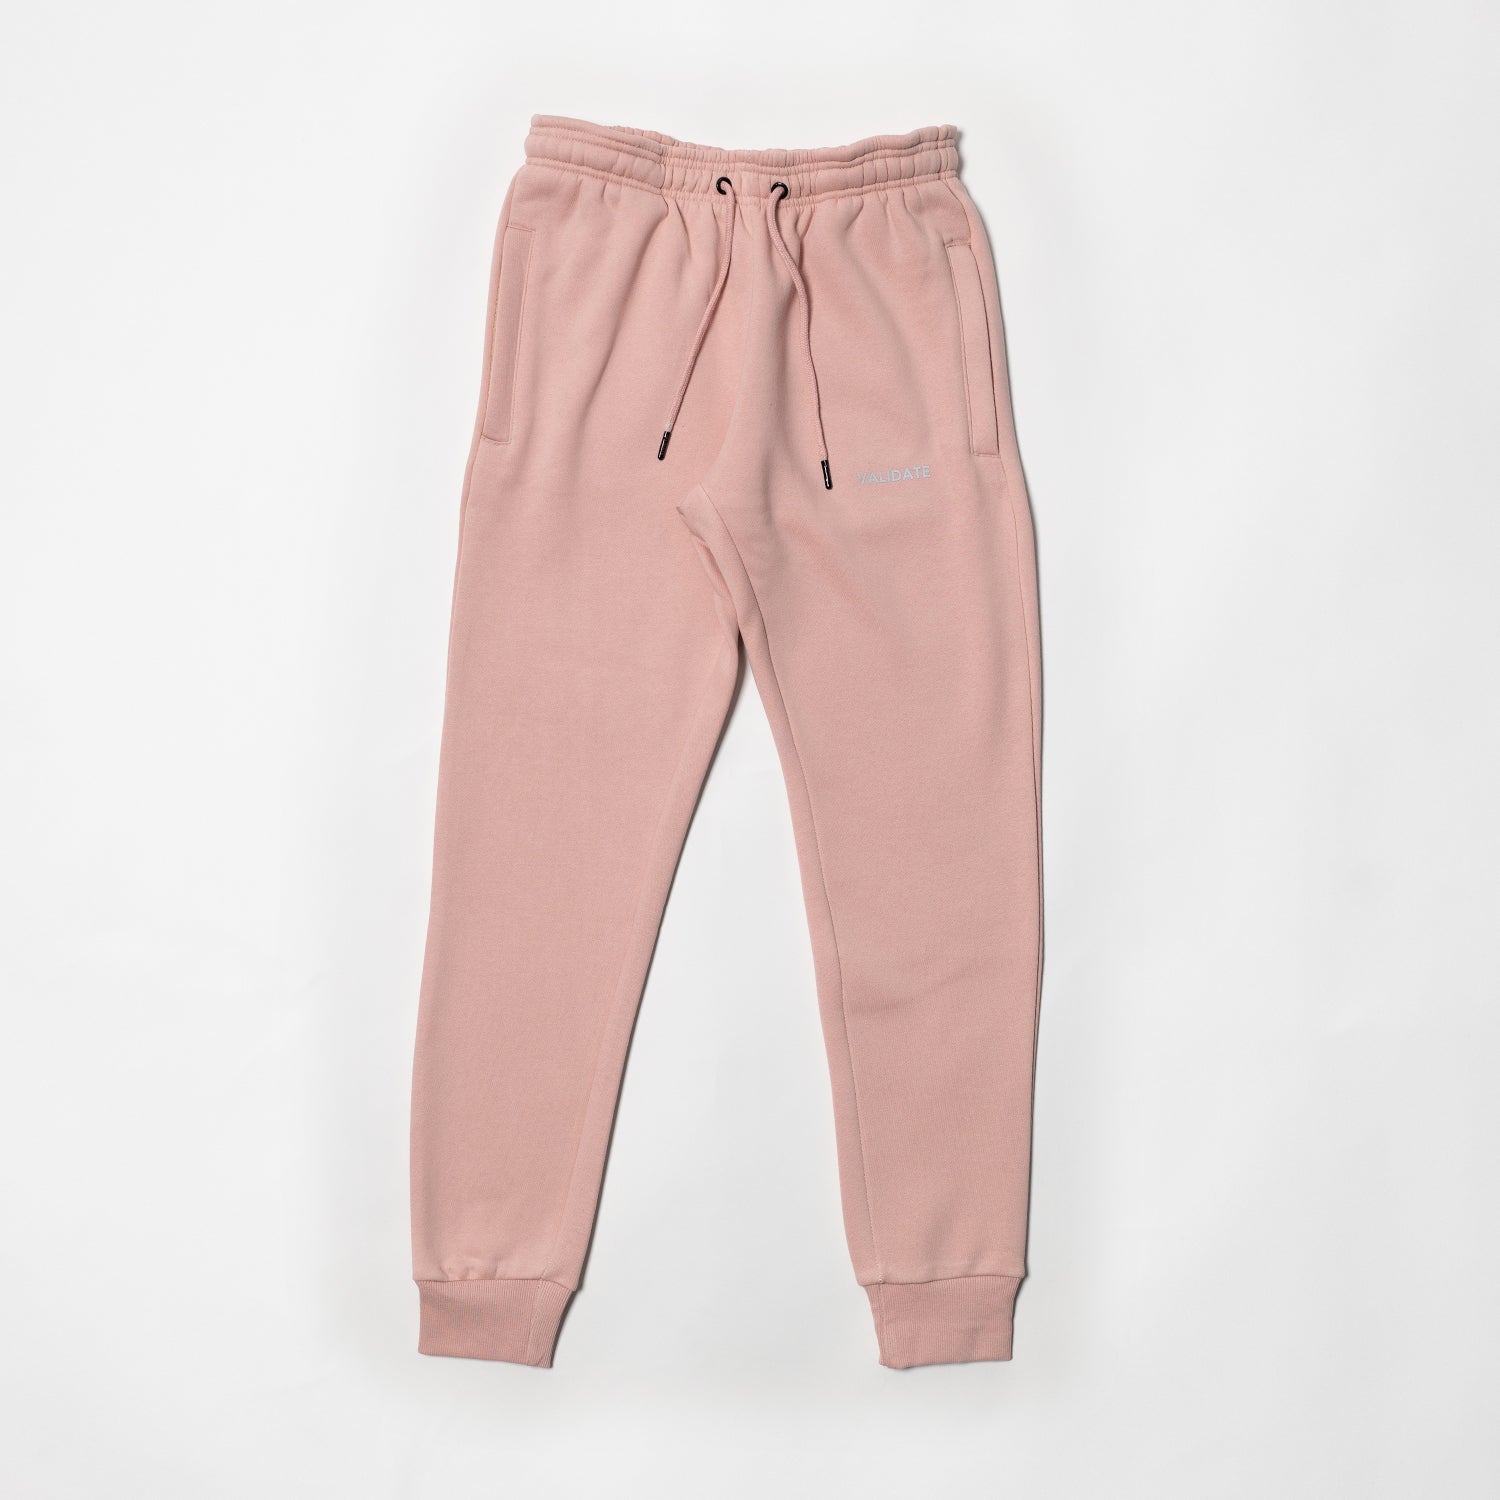 Validate Sunset Pink Toby Joggers